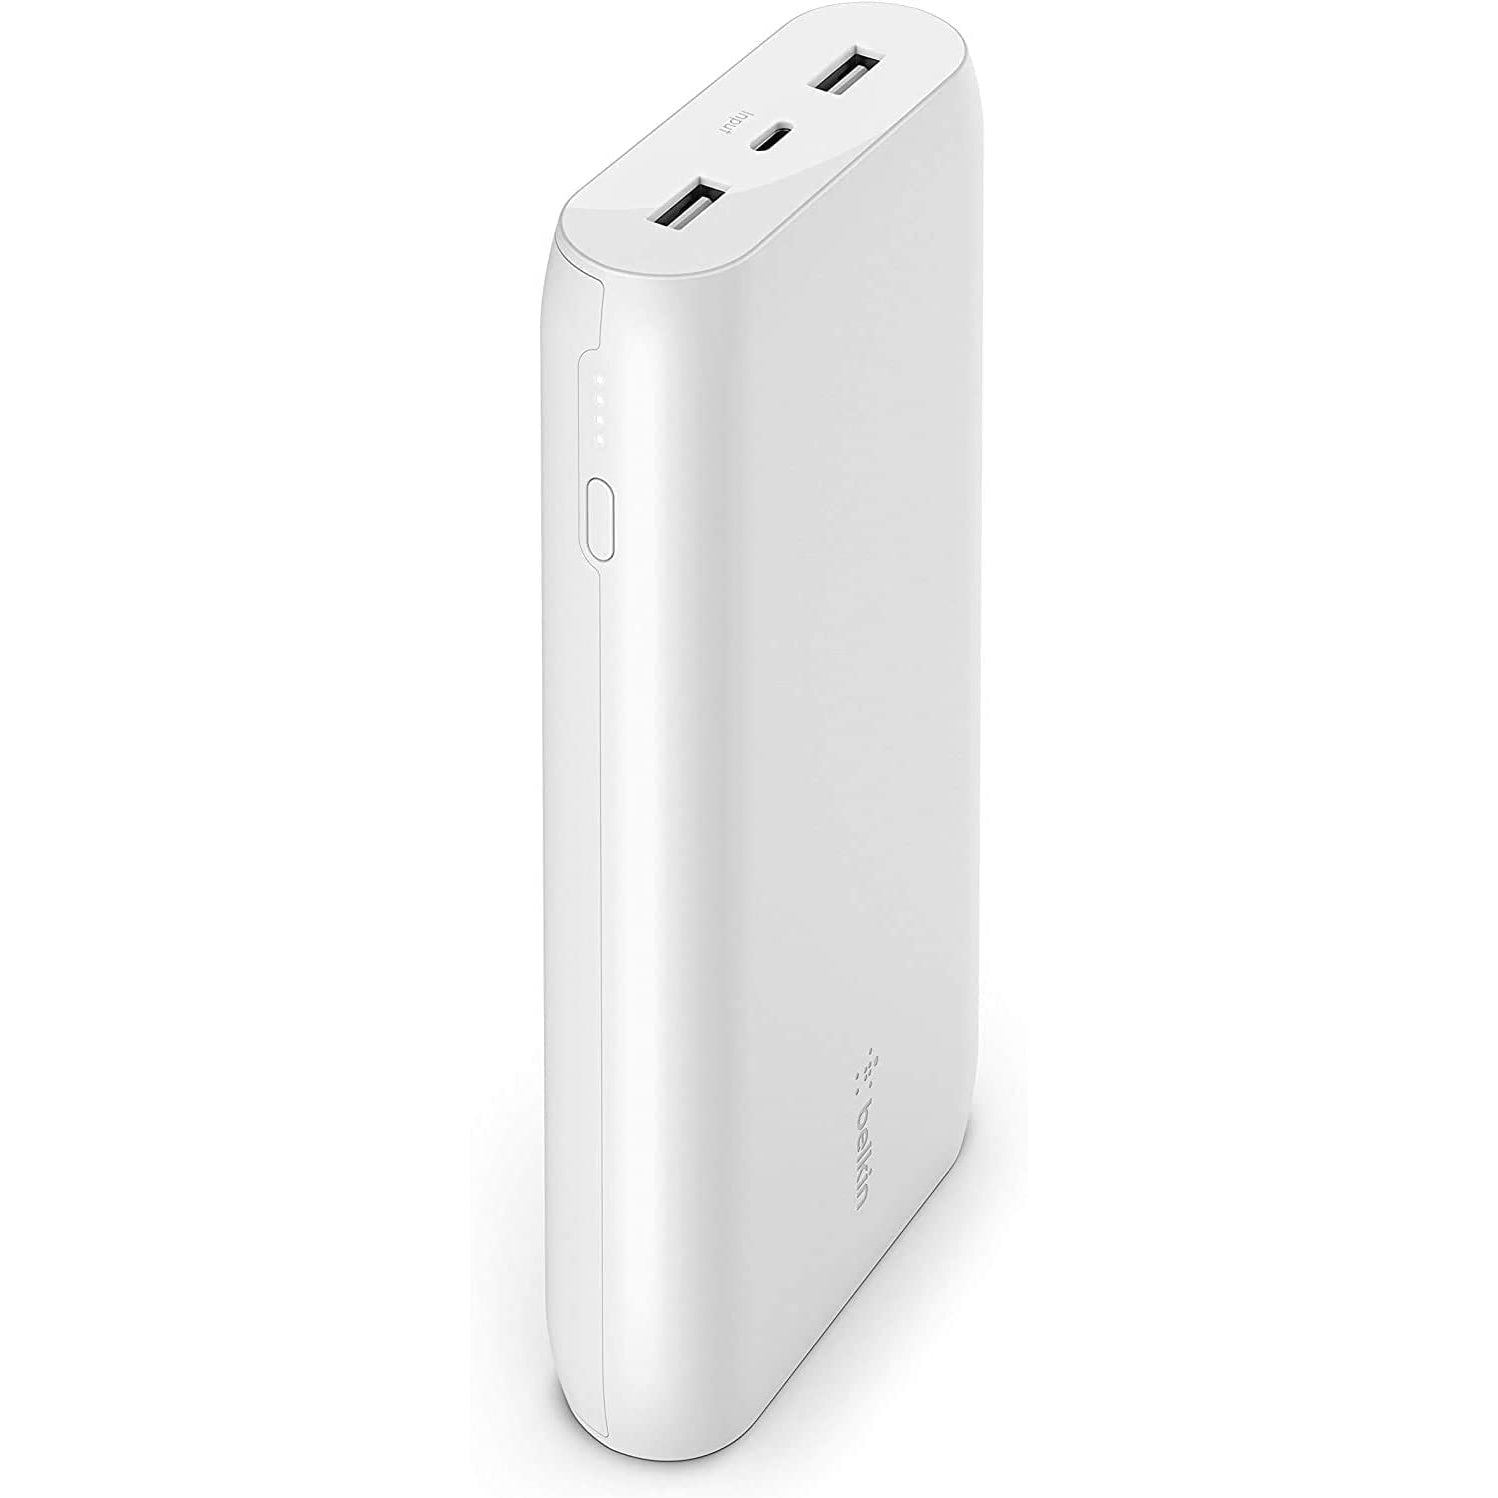 Belkin Boost Charge Power Bank 20K (Portable Charger with Dual USB Ports, 20000 mAh Capacity, Battery Pack) - White